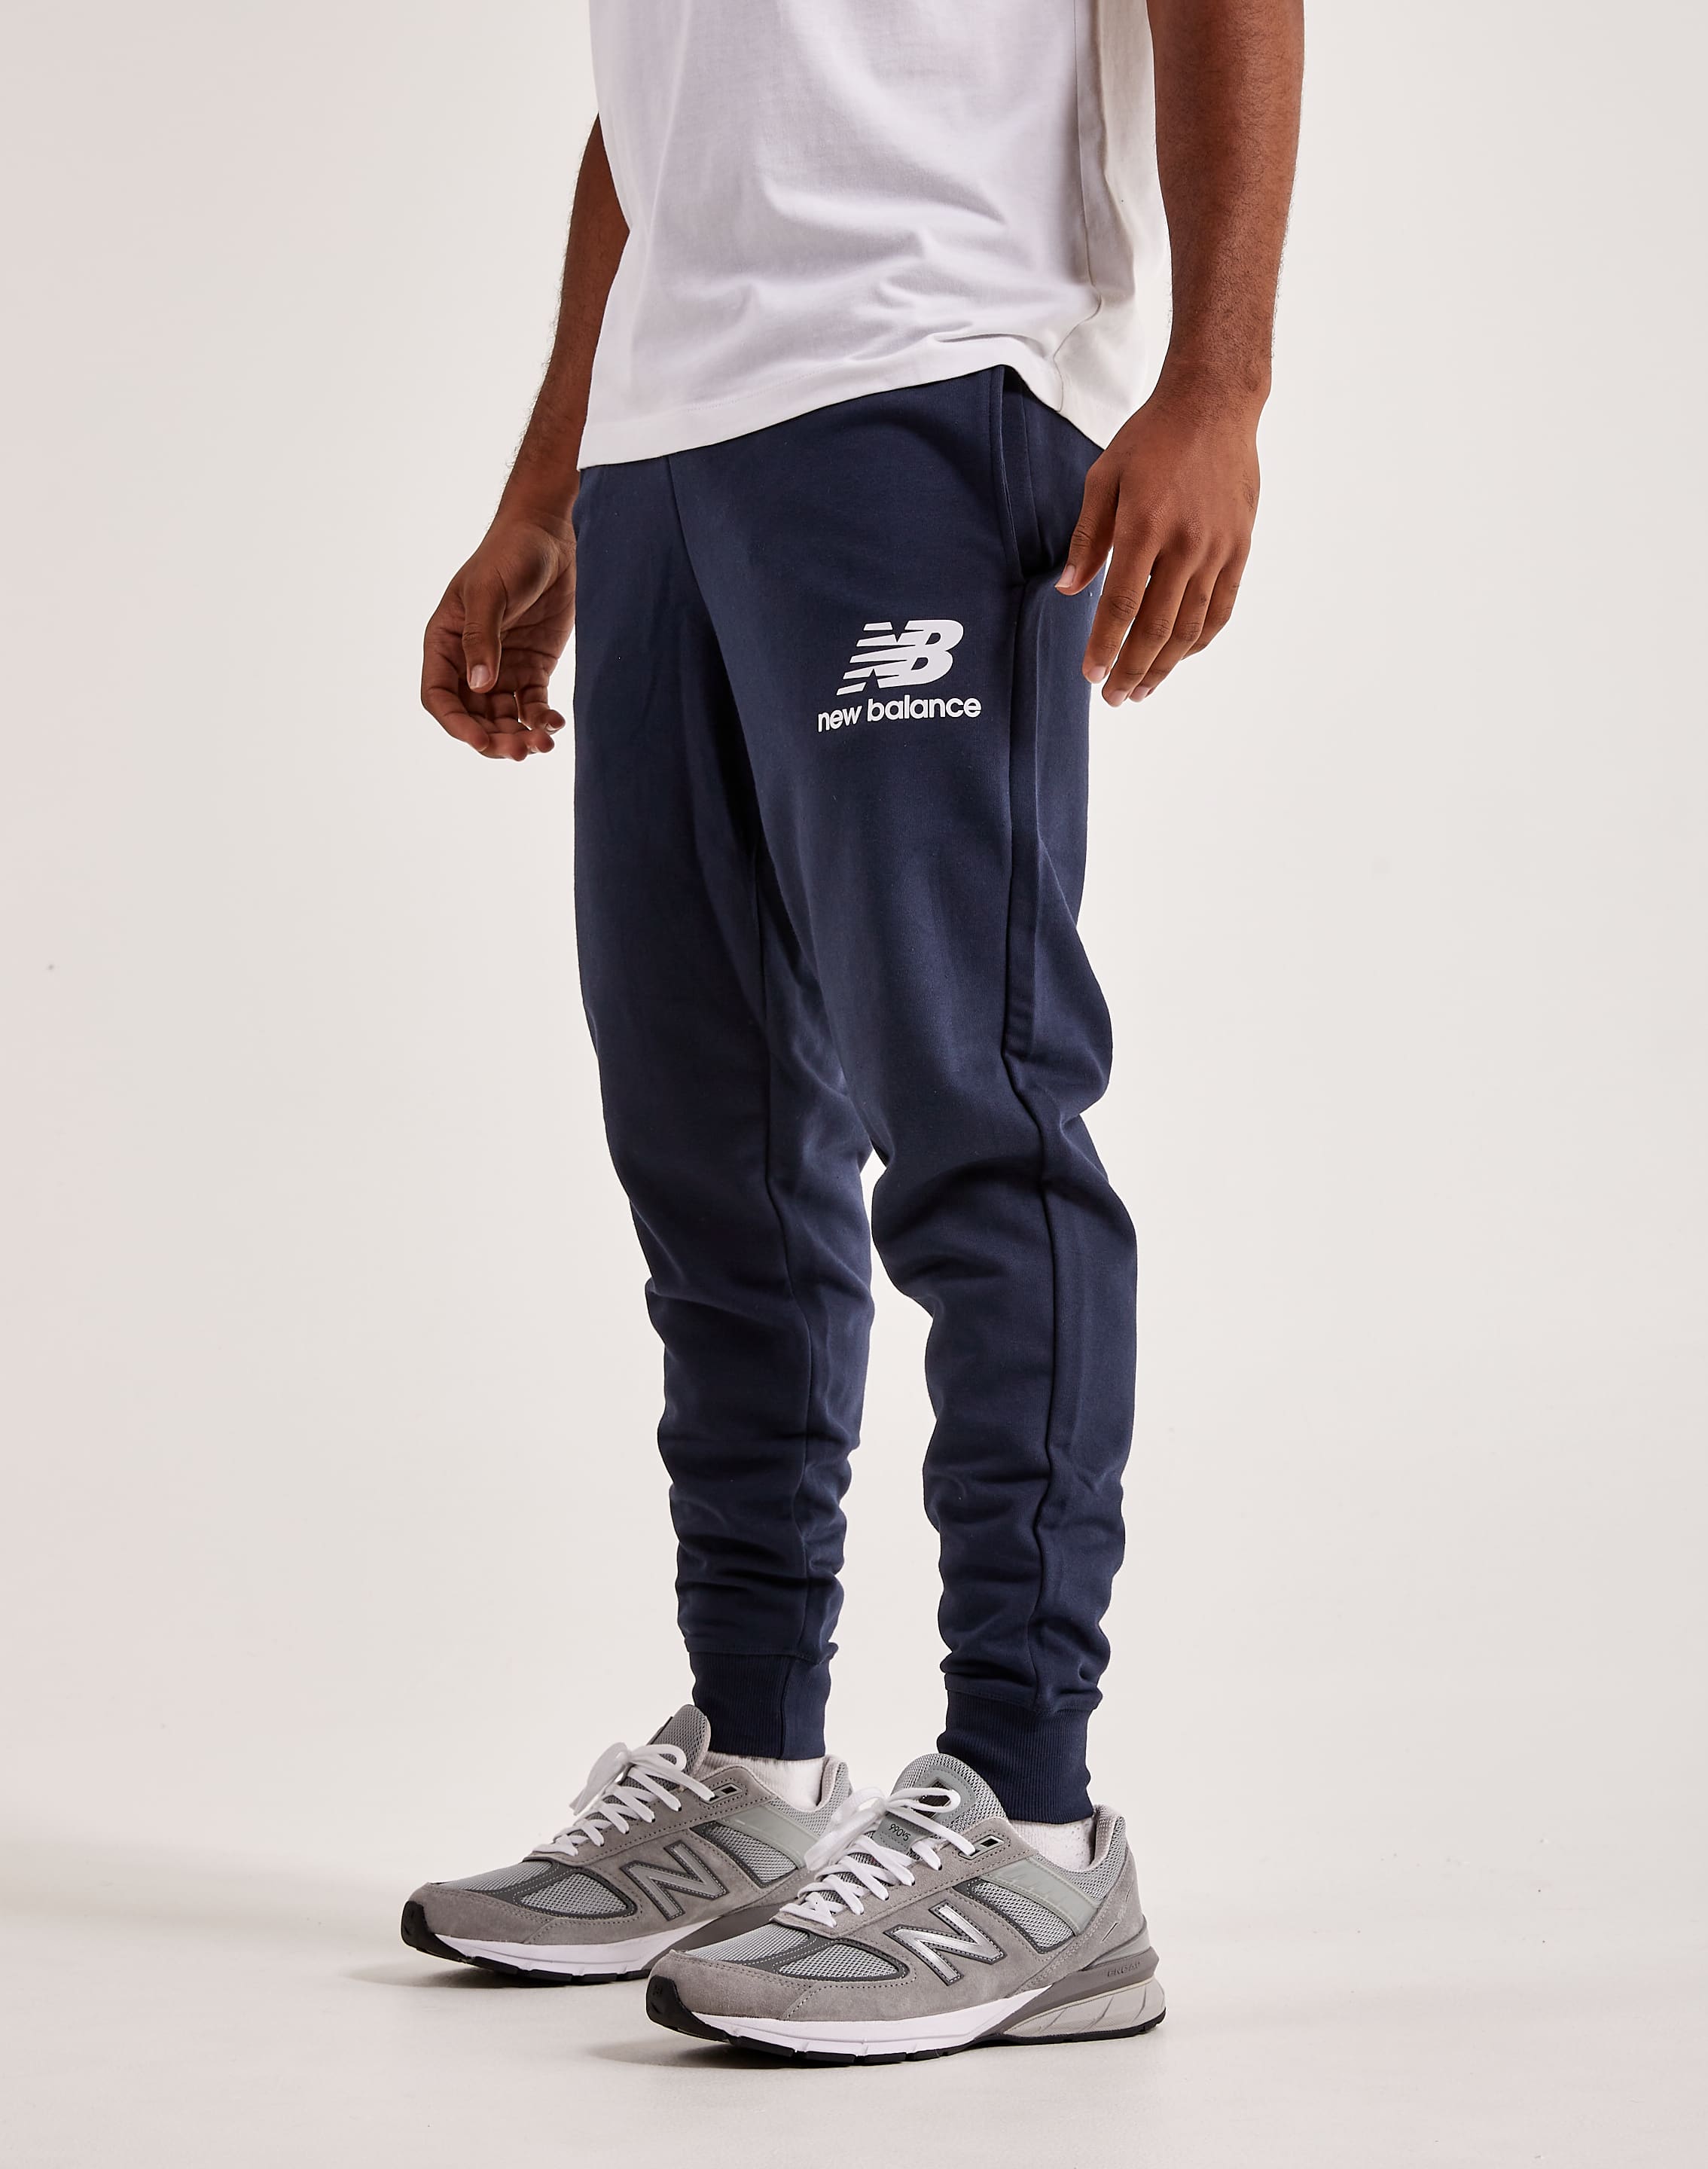 New Balance Stacked DTLR – Joggers Essentials